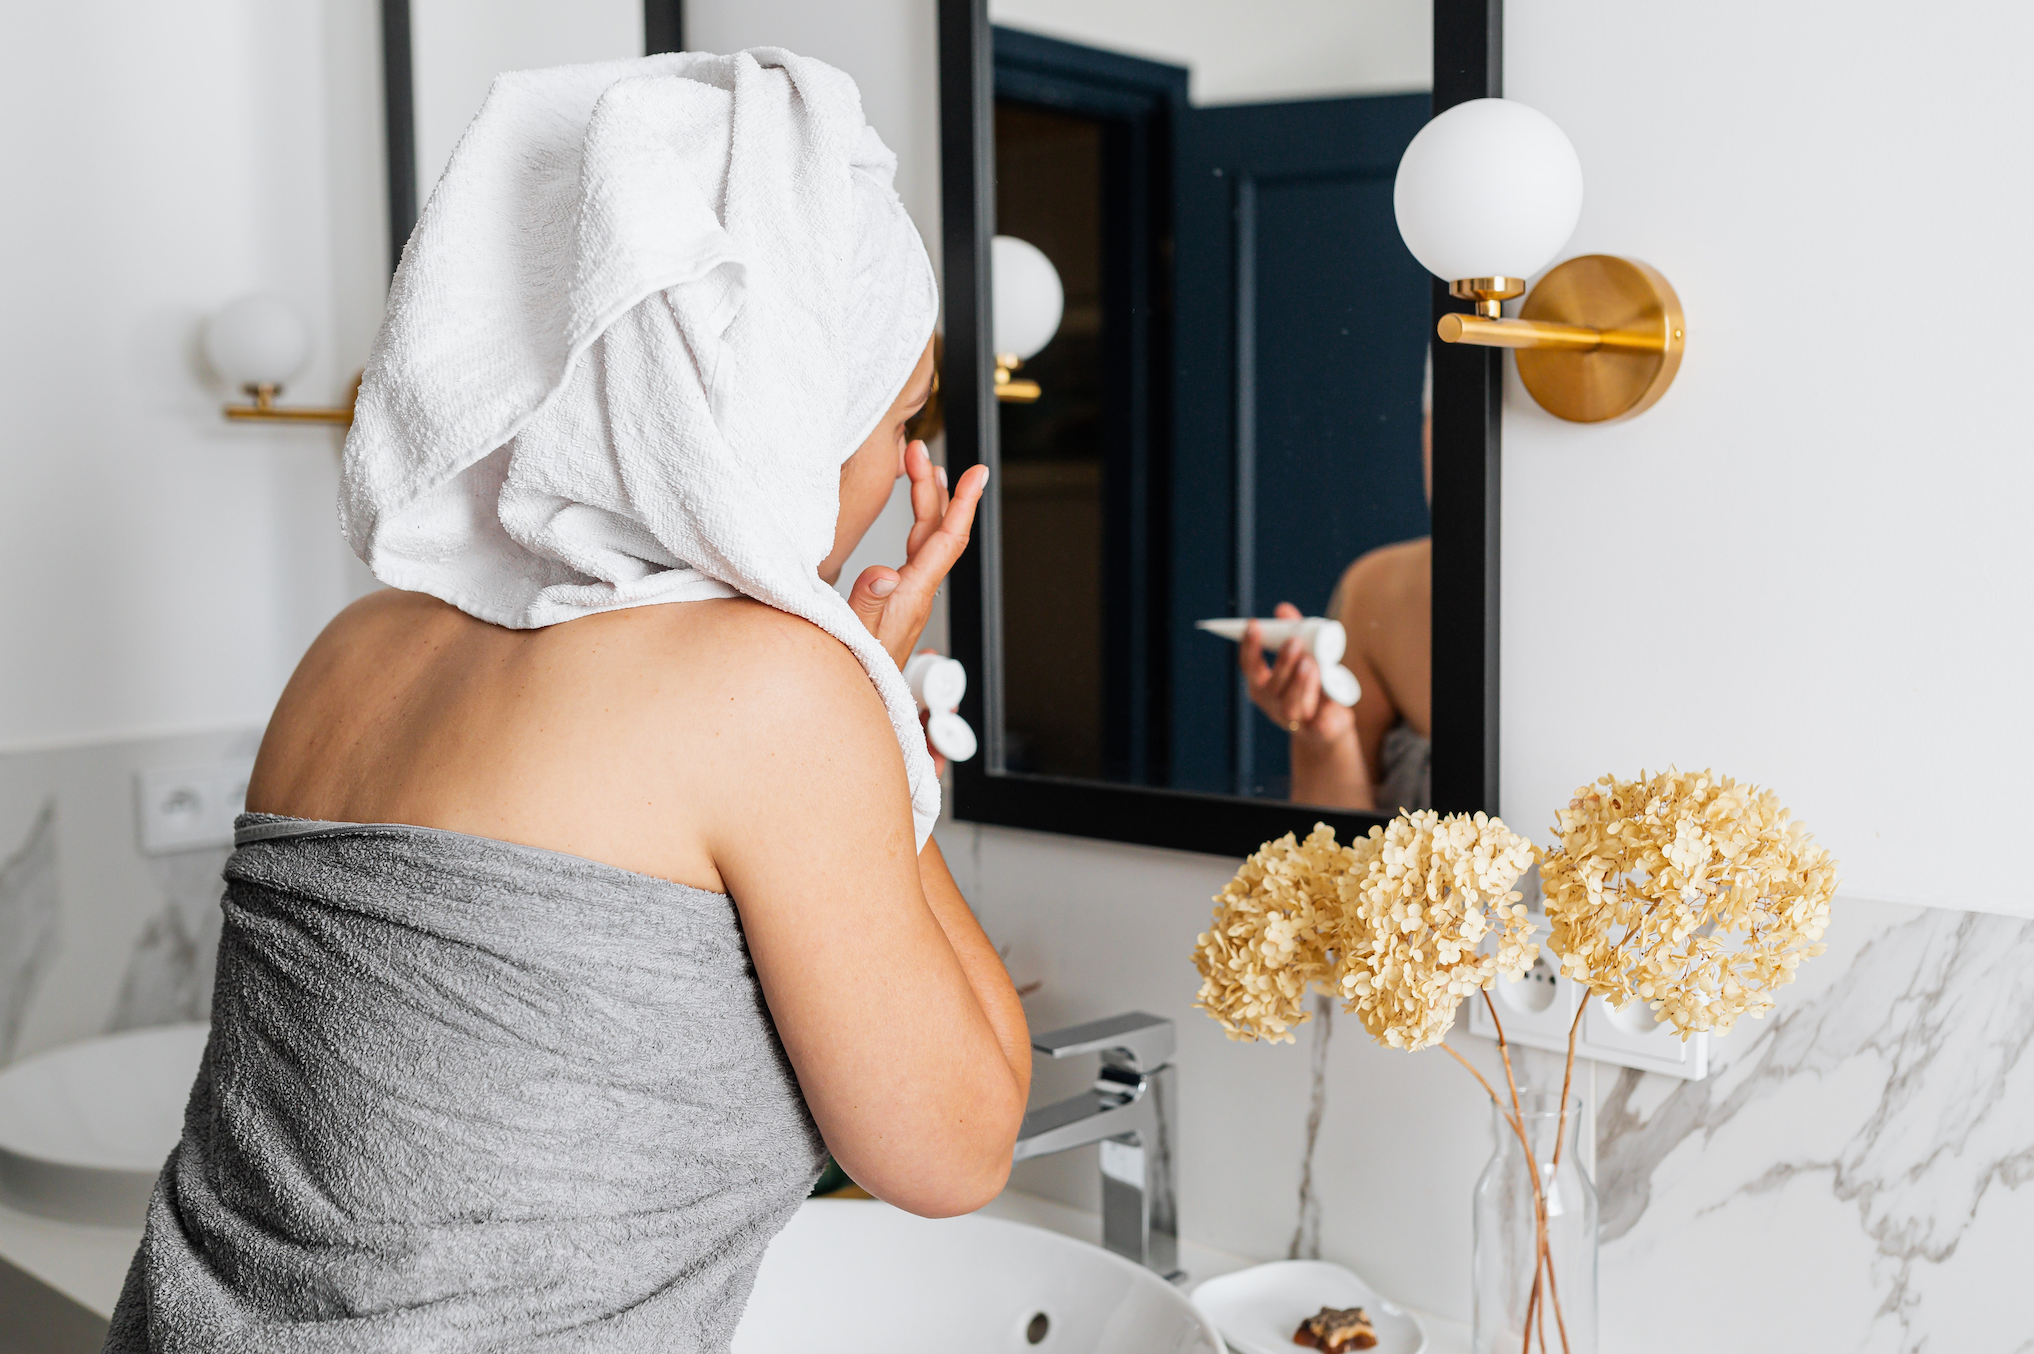 How Is the Perfect Bathroom Vanity the Secret to Boosting Morning Confidence